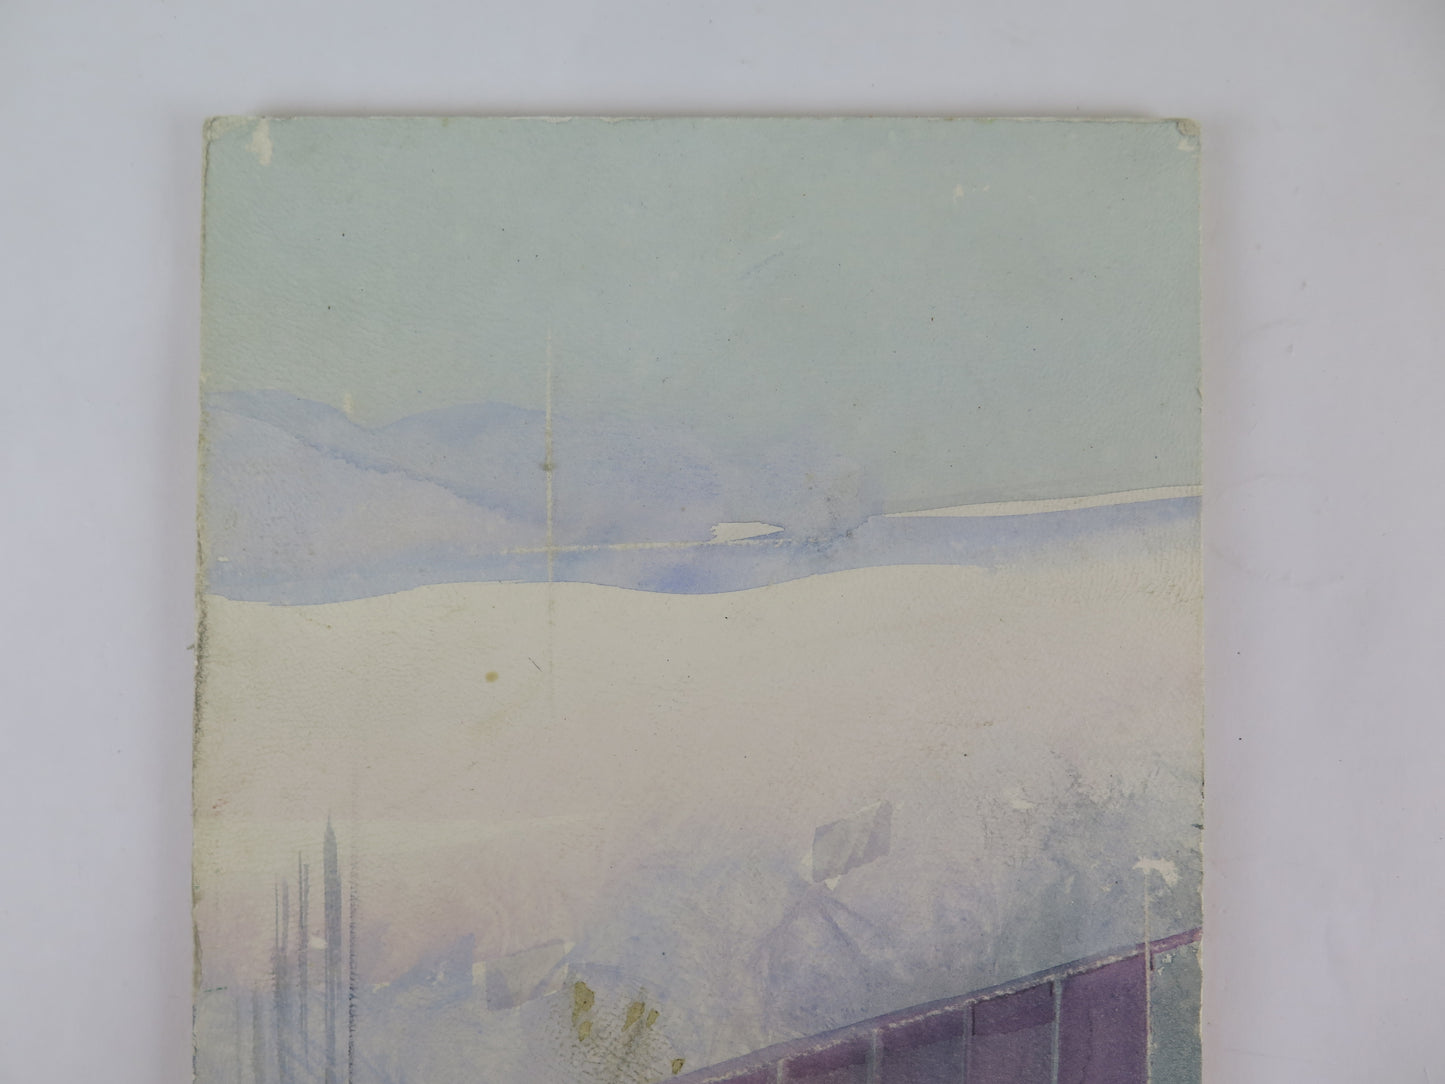 OLD PAINTING SNOWY WINTER LANDSCAPE PAINTING SMALL SIZES VINTAGE P1